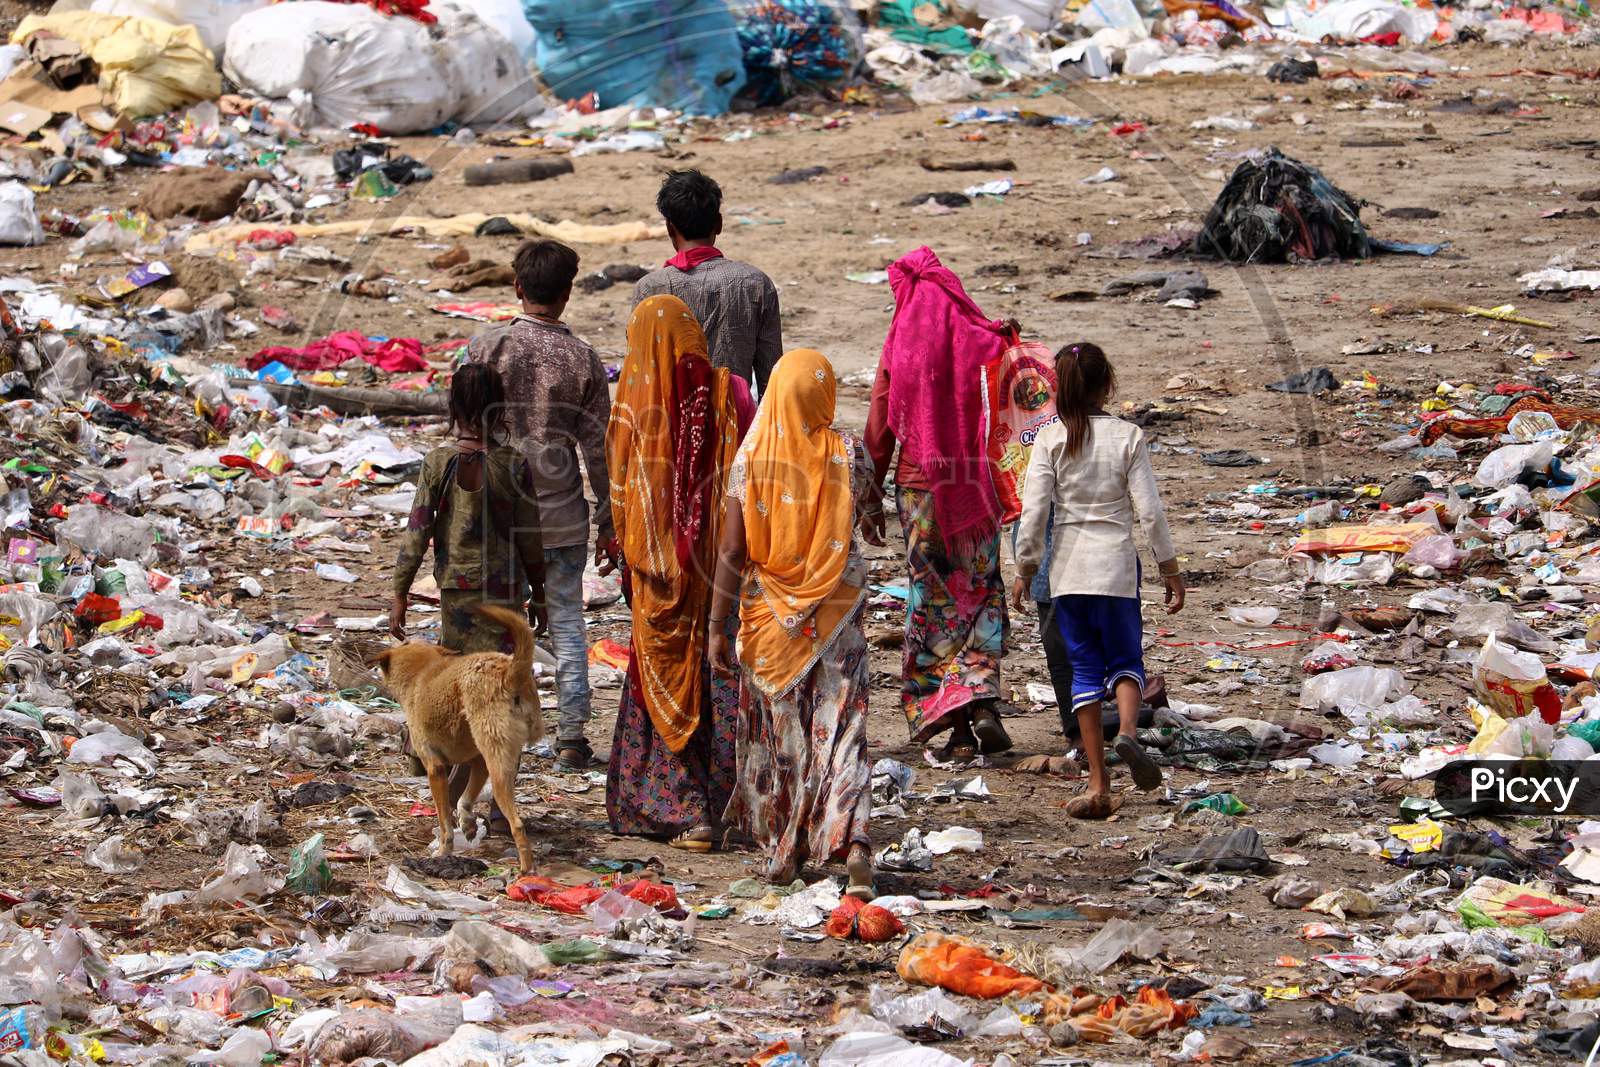 Indian Rag-Pickers Look For Recyclable Material At A Municipal Waste Dumping Site On The Eve Of World Environment Day In Ajmer, Rajasthan, India On 04 May 2020.